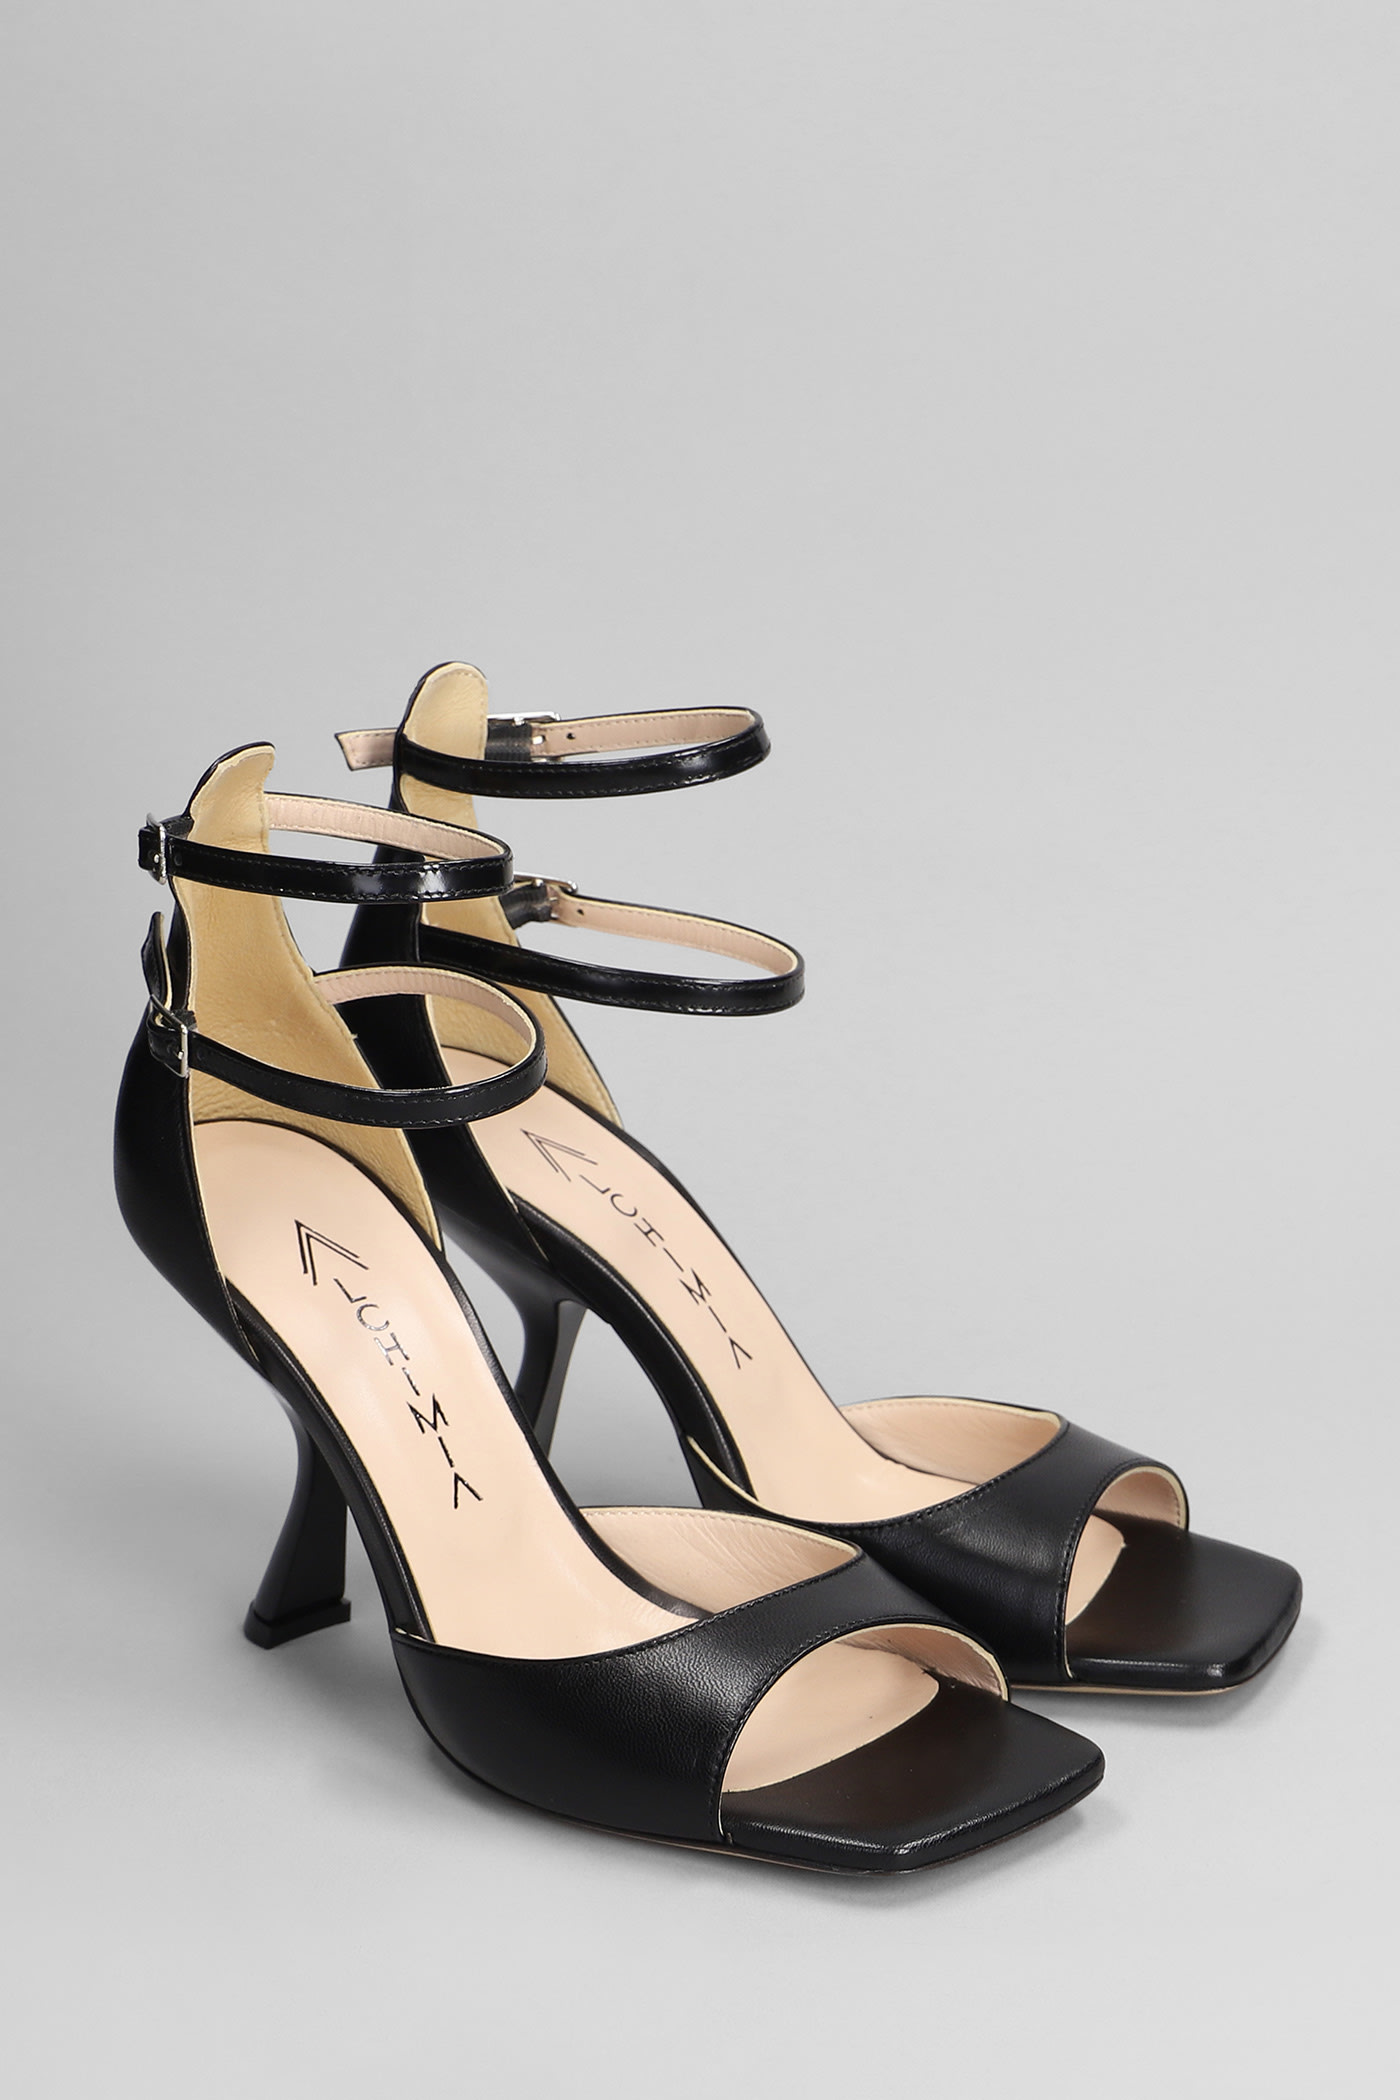 Shop Alchimia Sandals In Black Leather